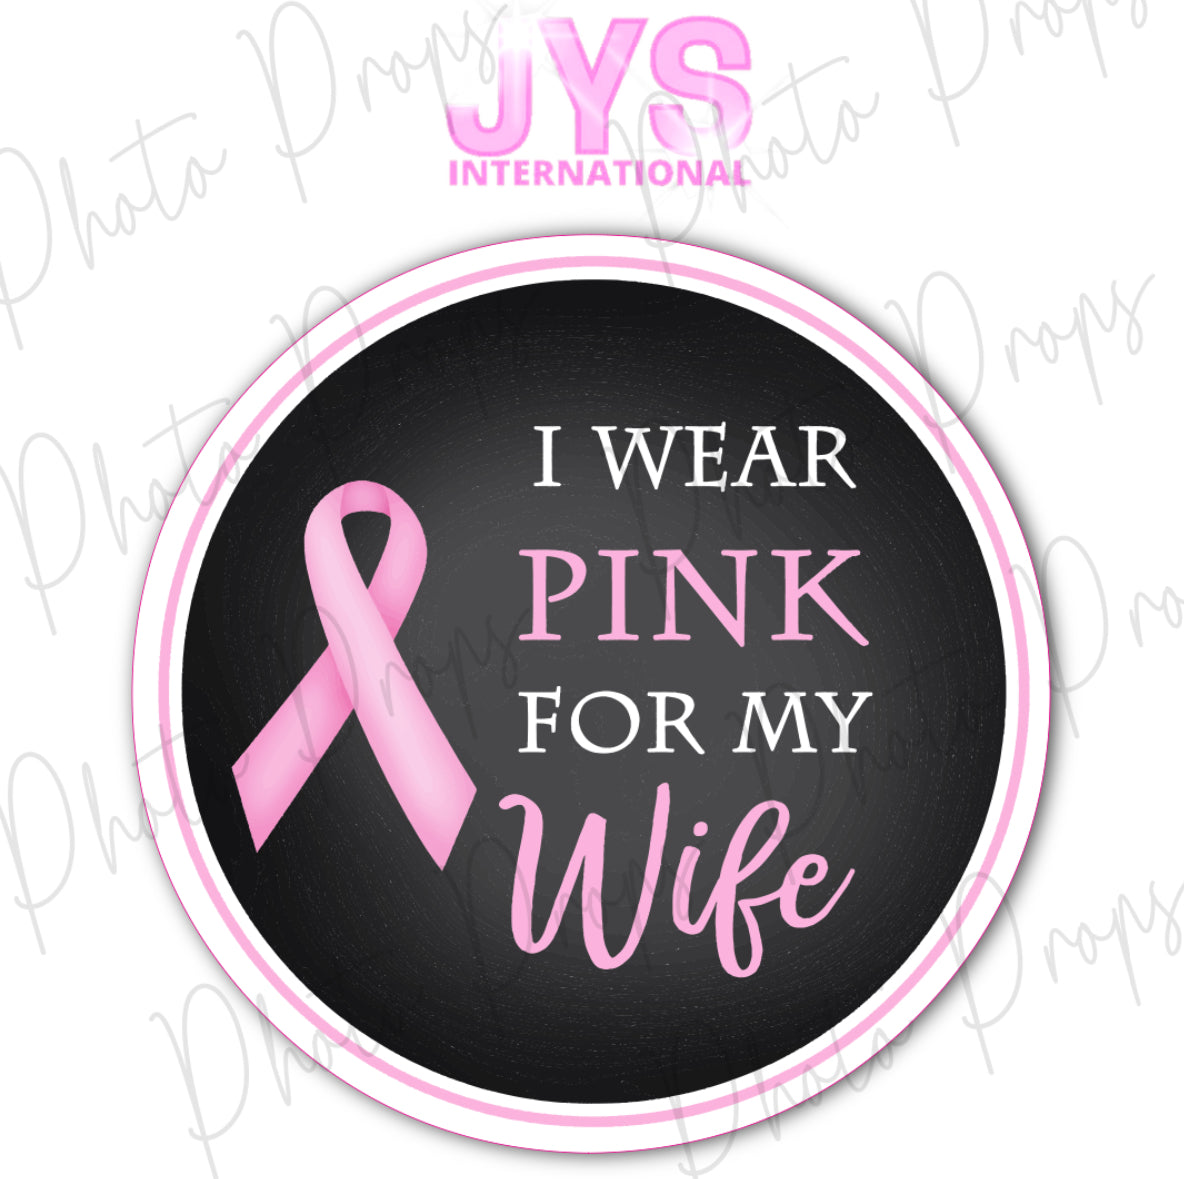 P1282: I WEAR PINK FOR MY WIFE